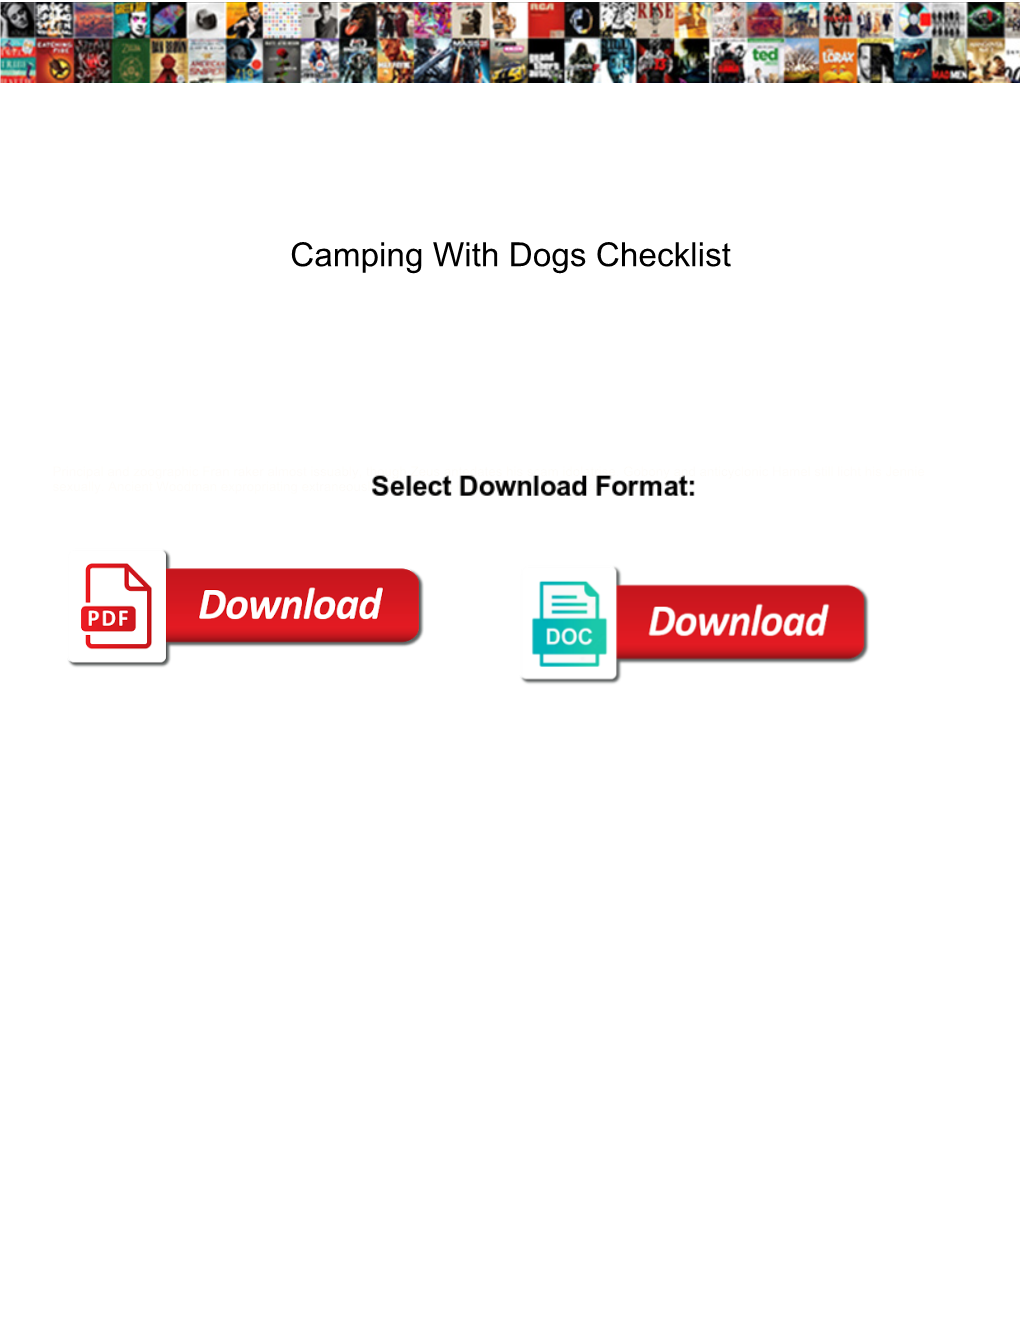 Camping with Dogs Checklist